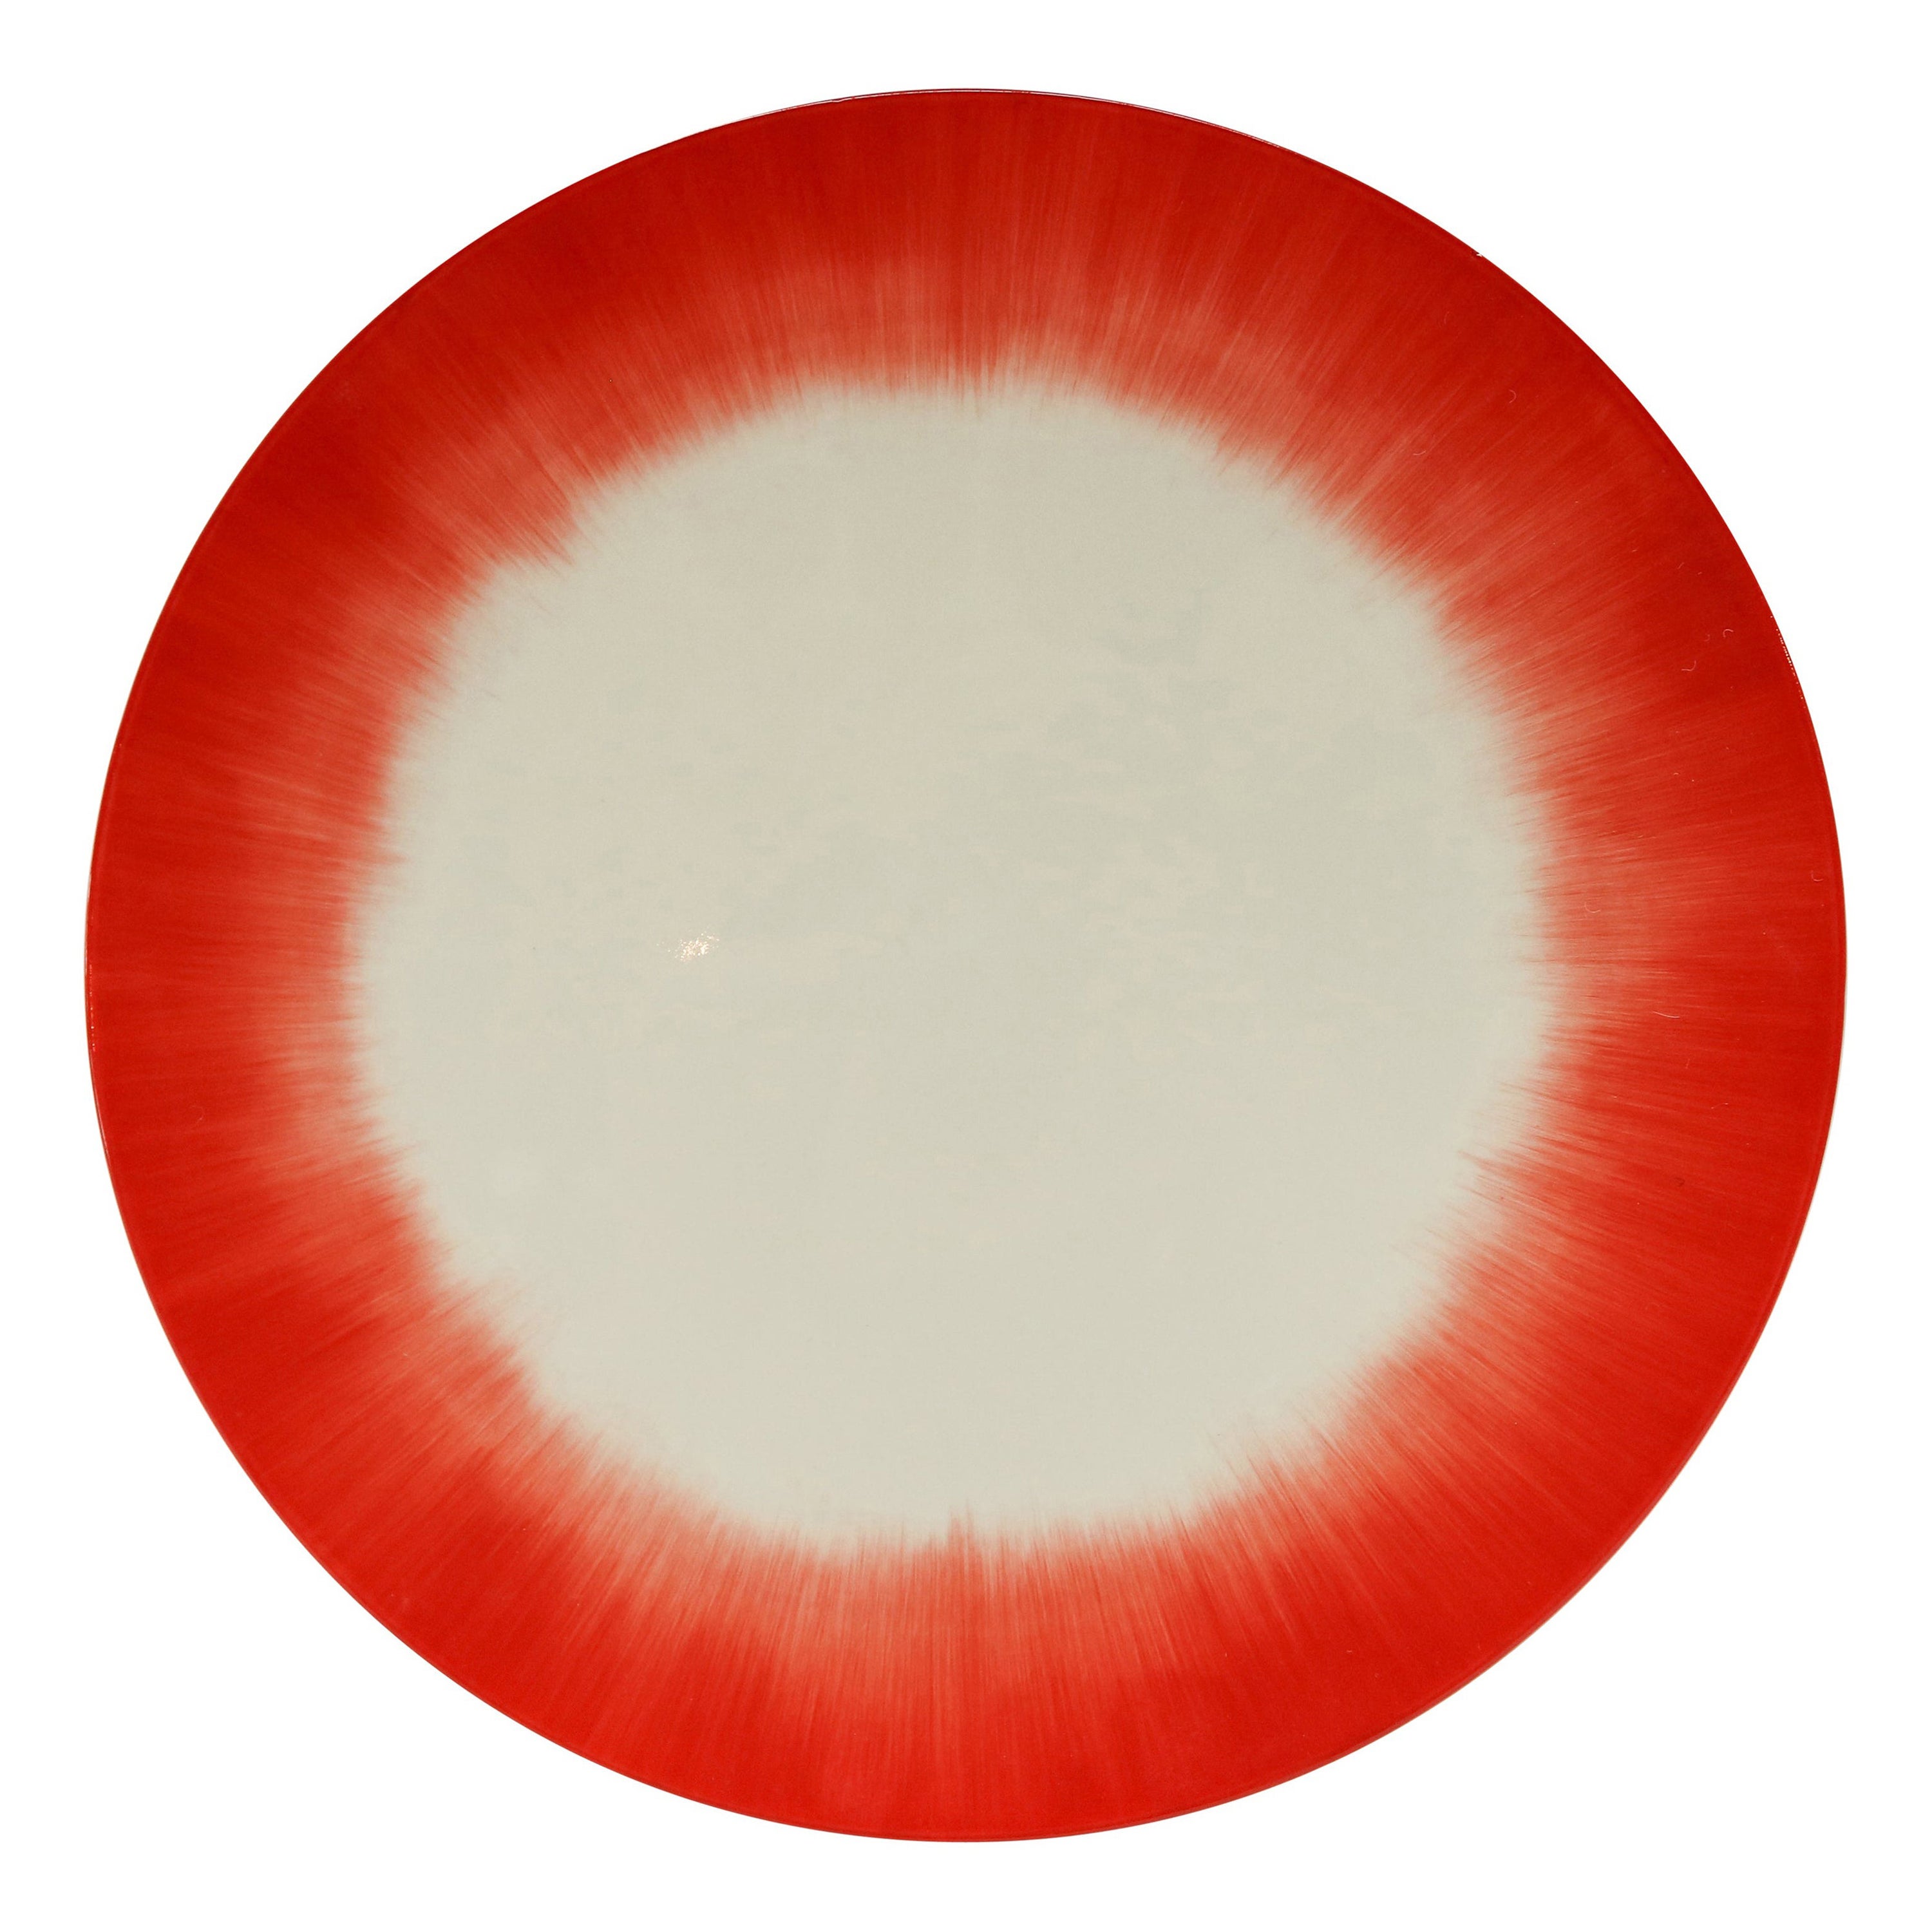 Ann Demeulemeester for Serax Dé Dinner Plate / Charger in off White / Red For Sale